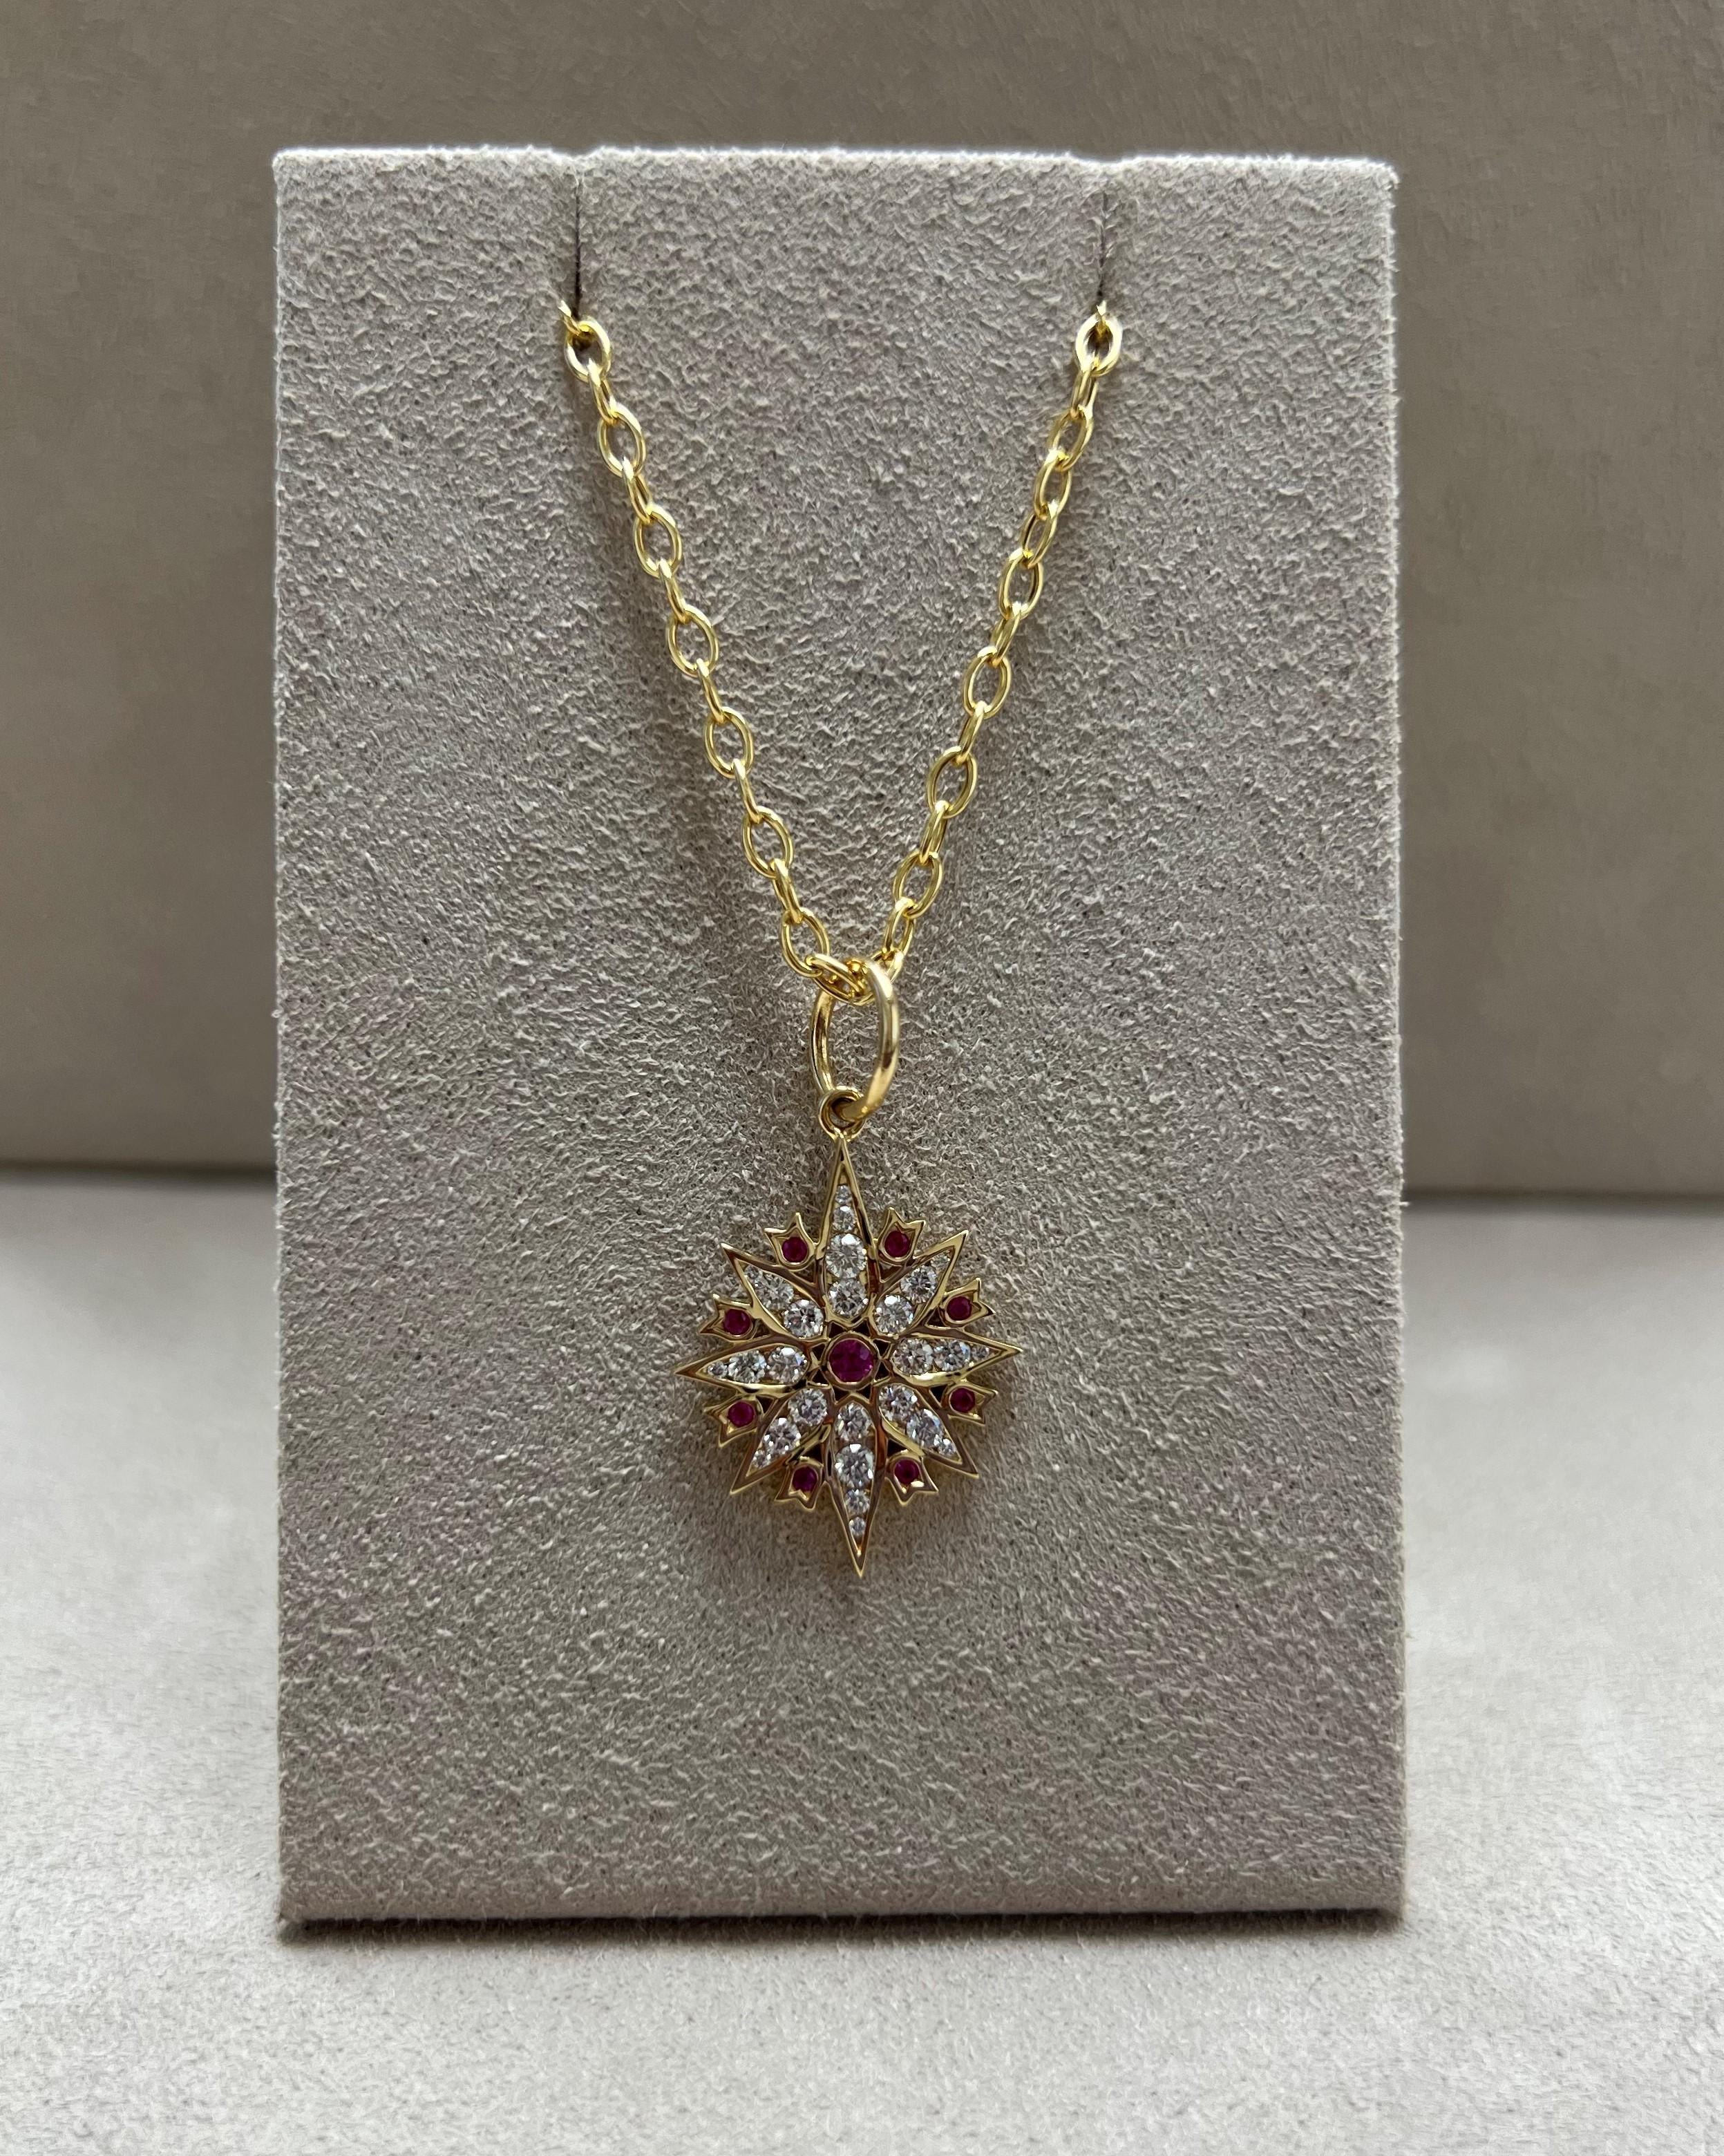 Created in 18 karat yellow gold
Rubies 0.14 carat approx.
Diamonds 0.50 carat approx.
Limited edition
Chain sold separately

This limited edition pendant is sculpted from 18 karat yellow gold and encrusted with 0.14 carat of rubies and 0.50 carat of